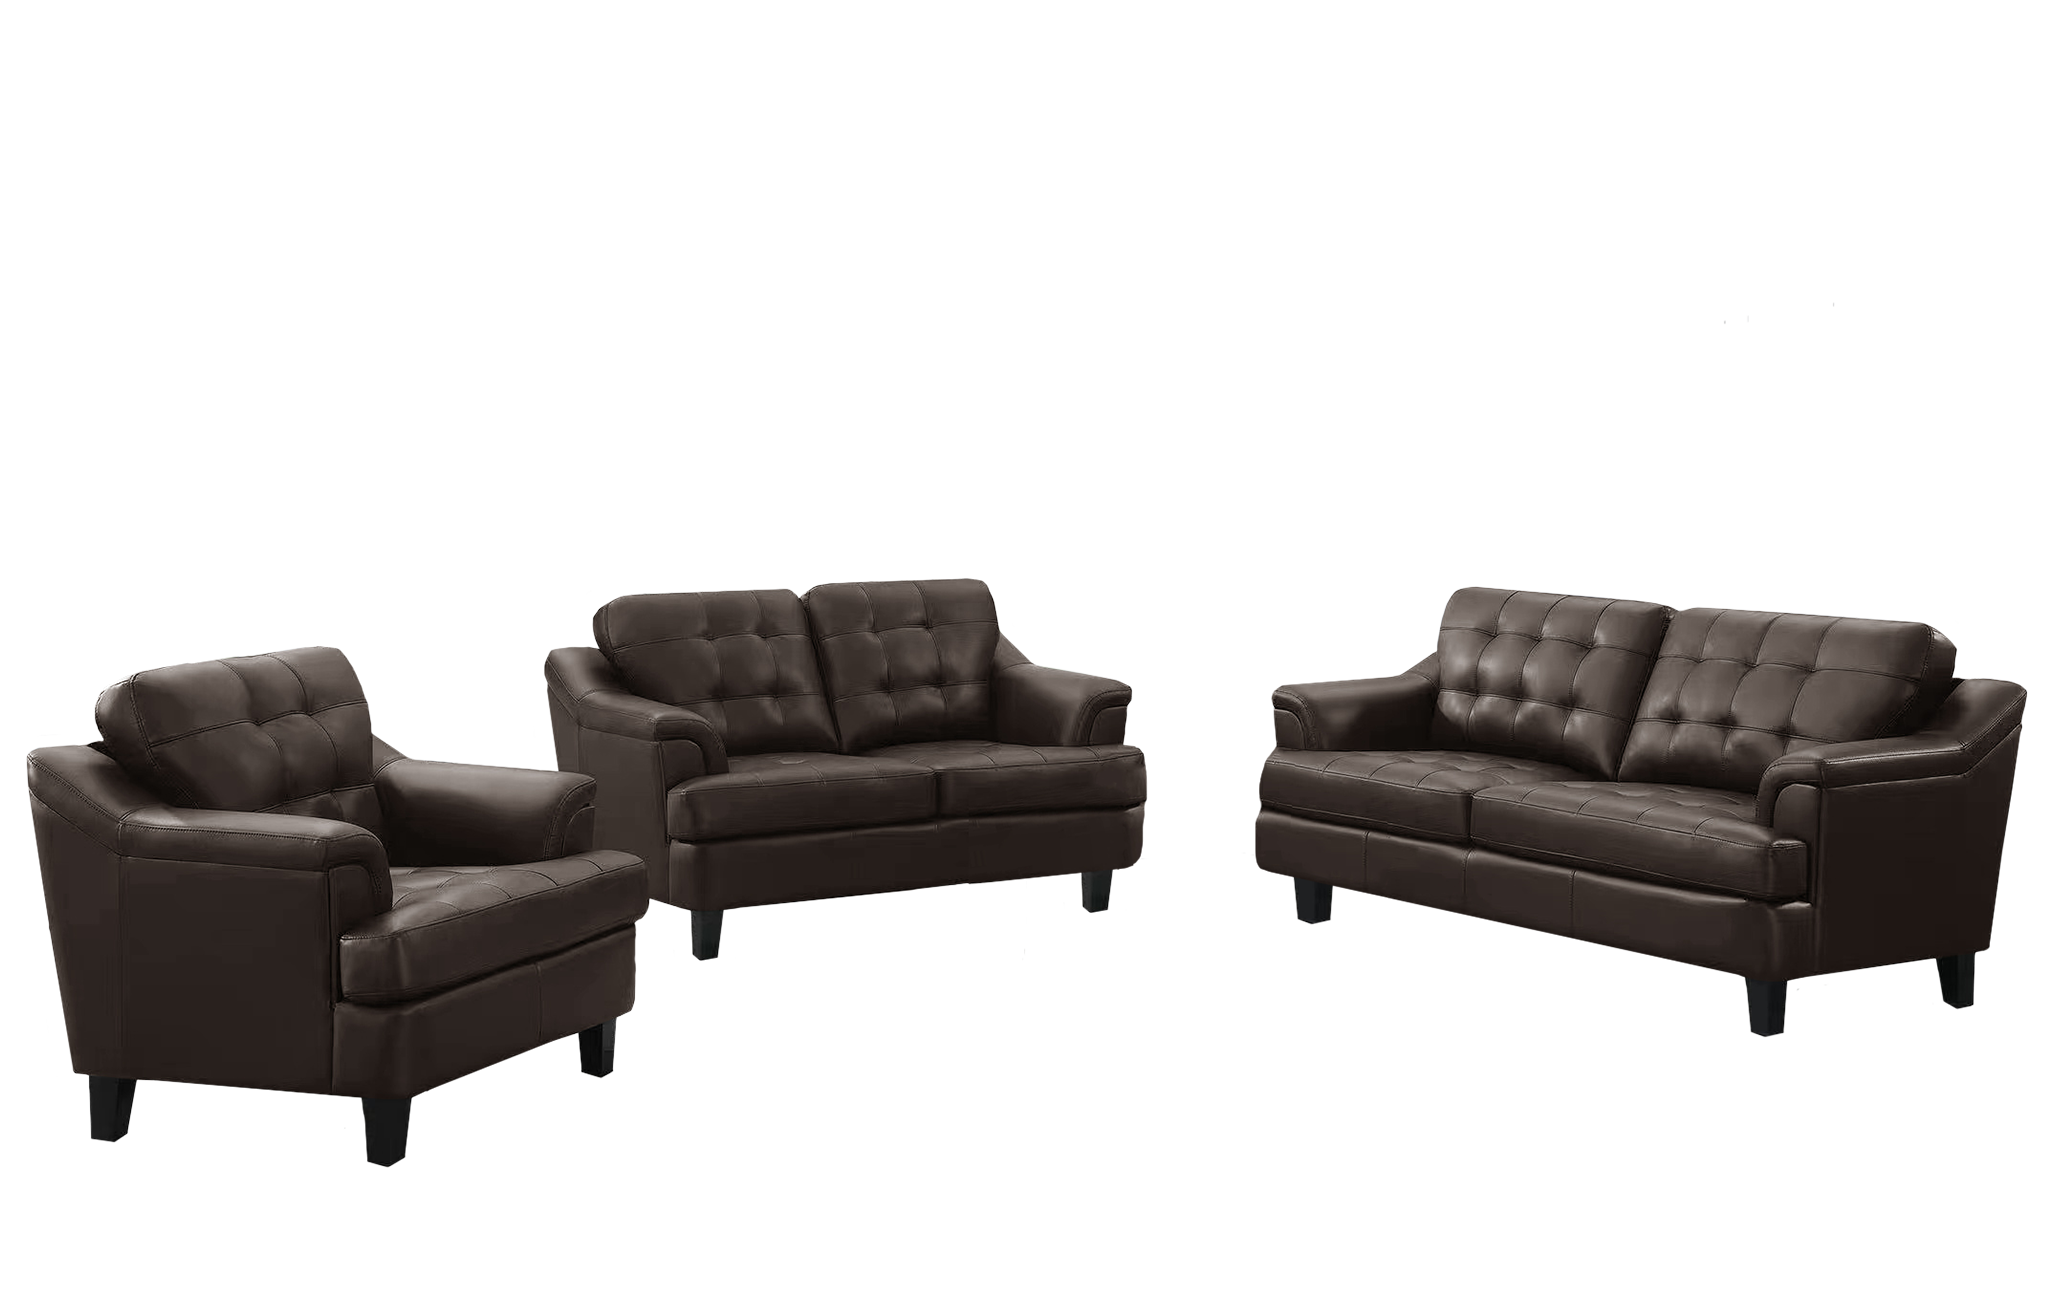 COMING SOON - Richicollection Furniture Warehouse